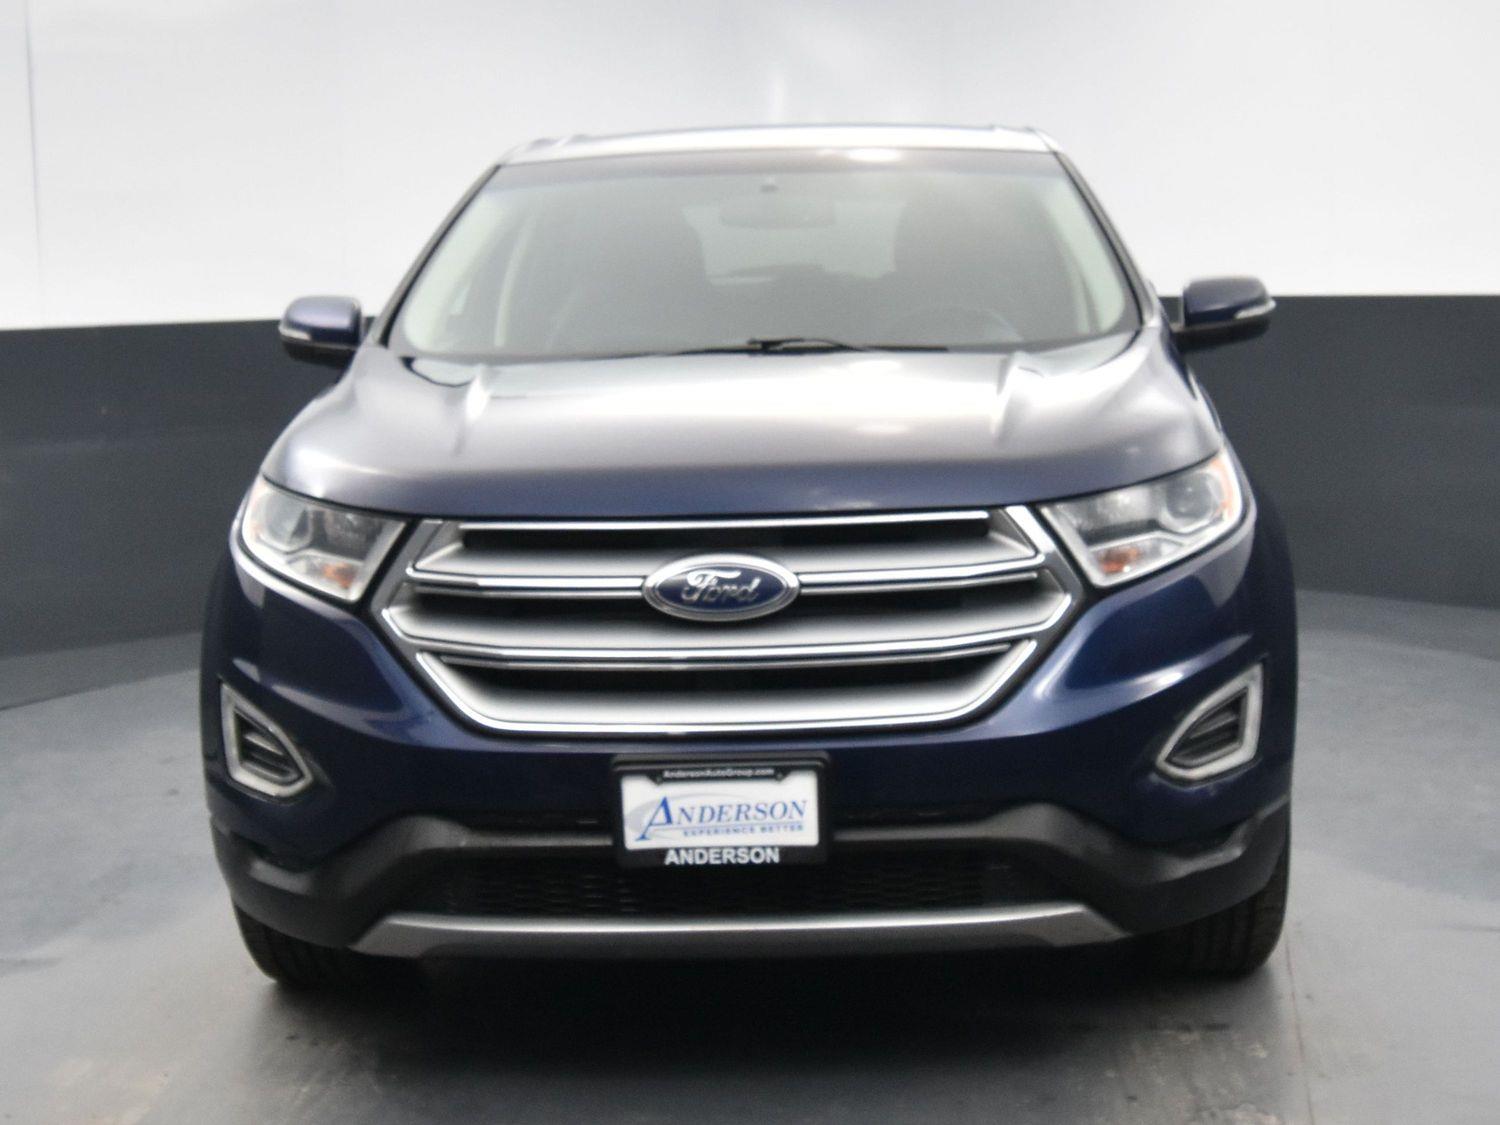 Used 2016 Ford Edge SEL Sport Utility for sale in Grand Island NE